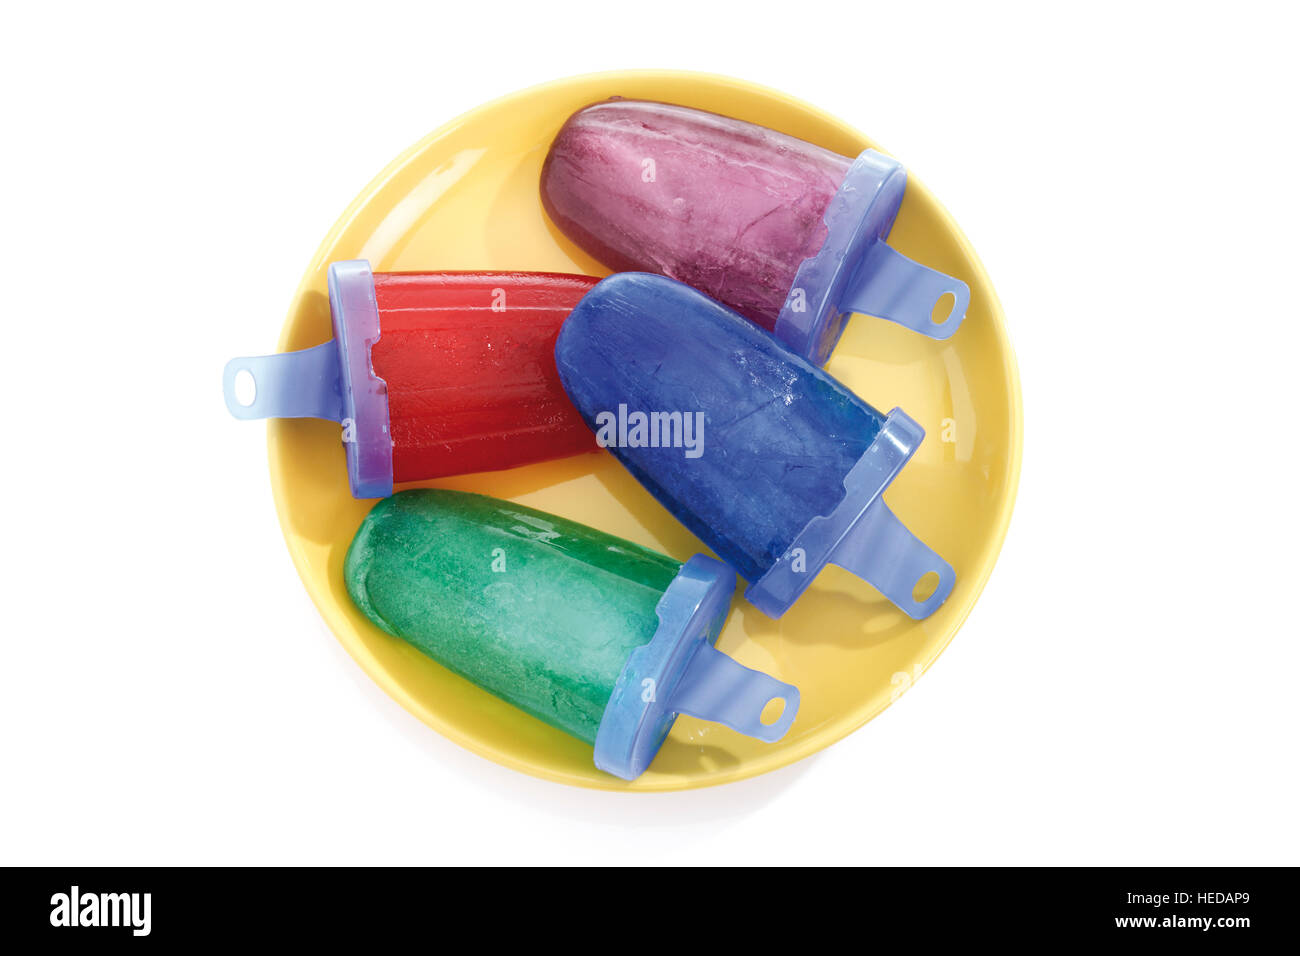 Homemade popsicles, ice lollies or ice pops, moulds, various colours Stock Photo